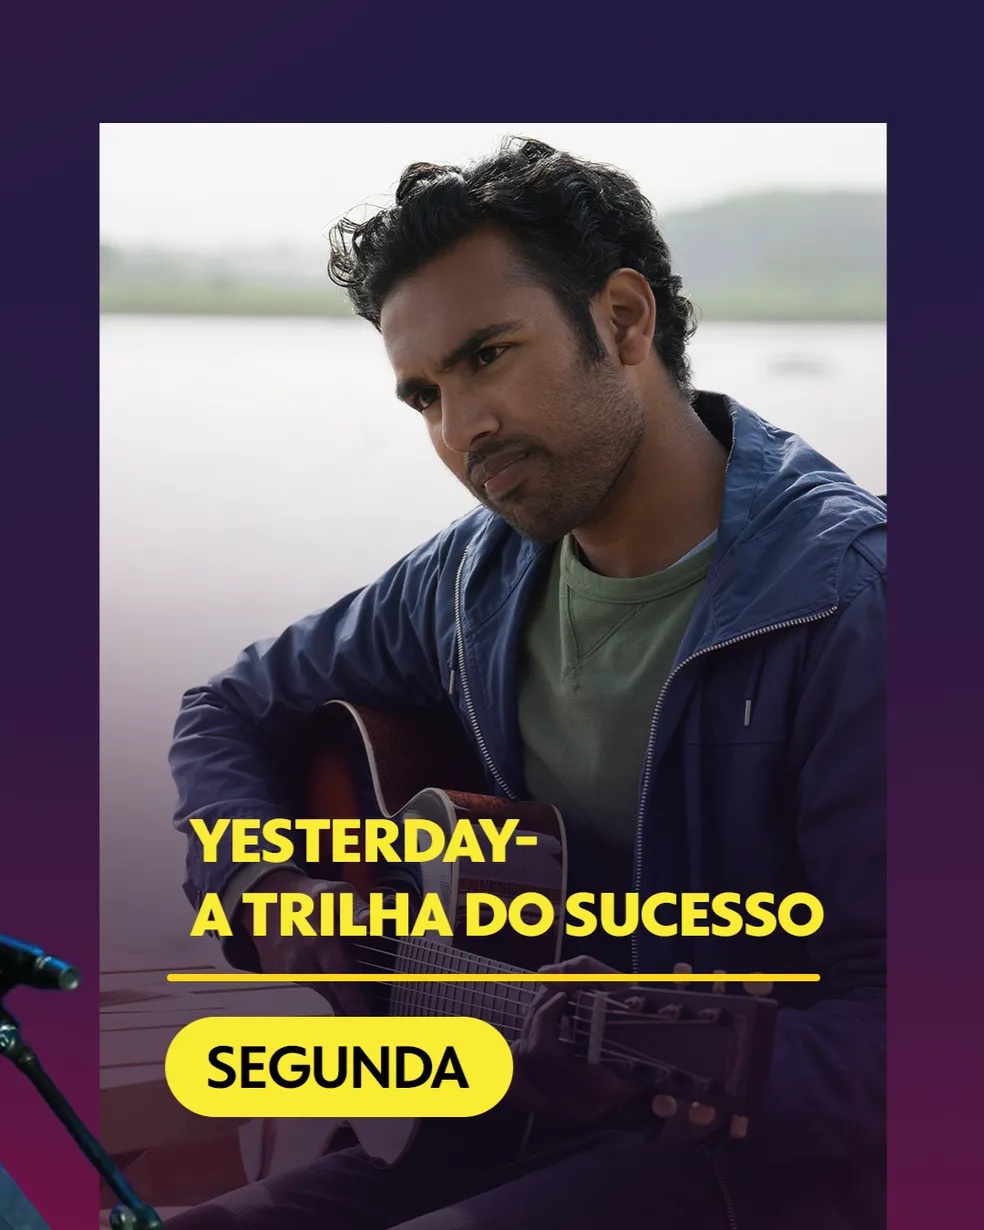 Yesterday - A Trilha do Sucesso